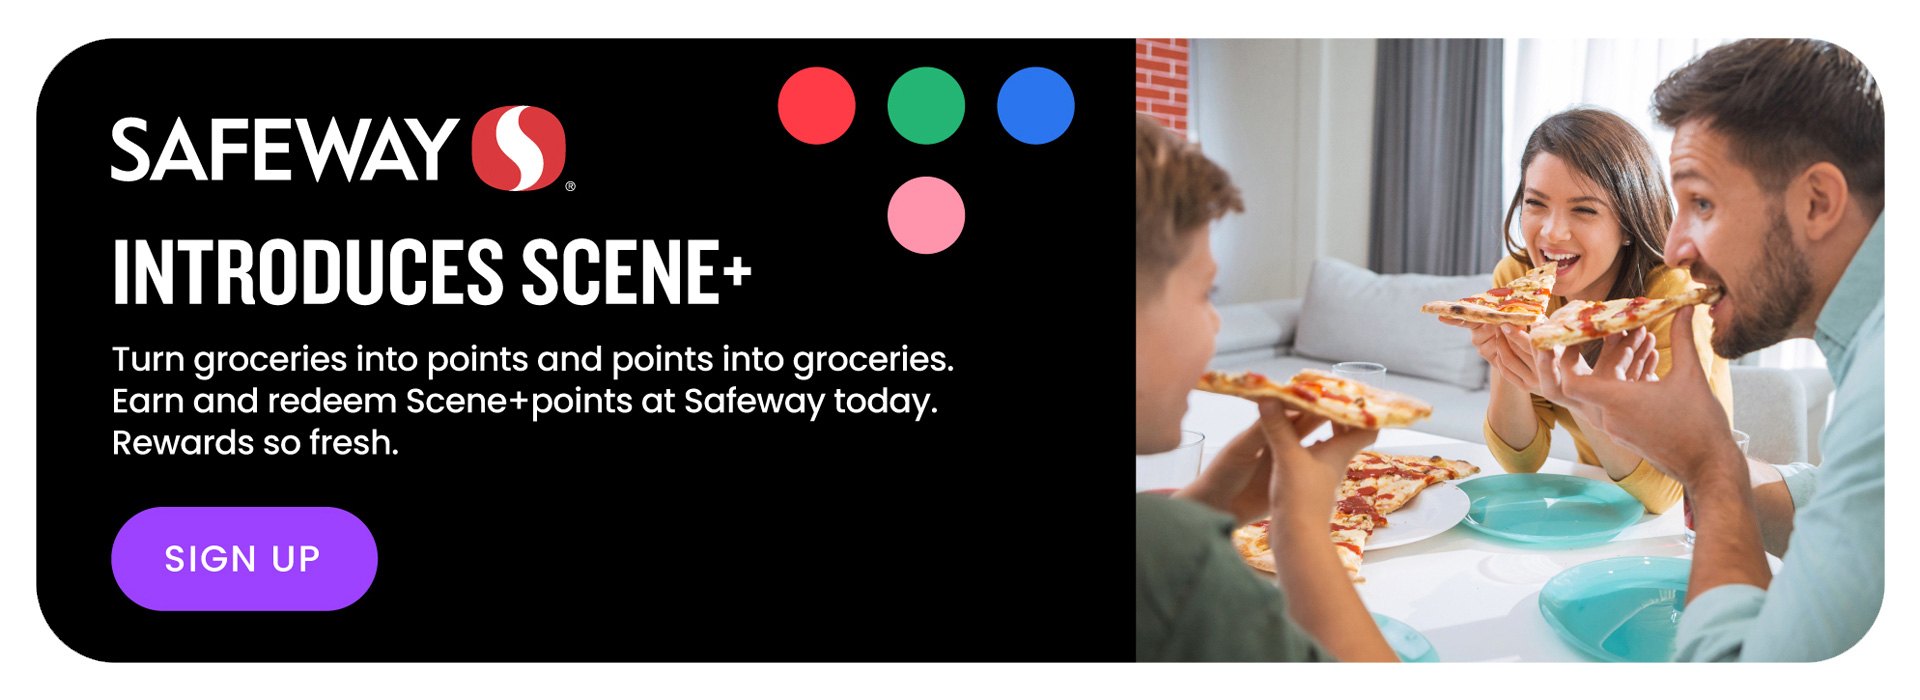 Text Reading 'Safeway introduces Scene+. Turn groceries into points and points into groceries. Earn and redeem Scene+ points at Safeway today. Rewards so fresh. To 'Sign Up', click on the button below.'